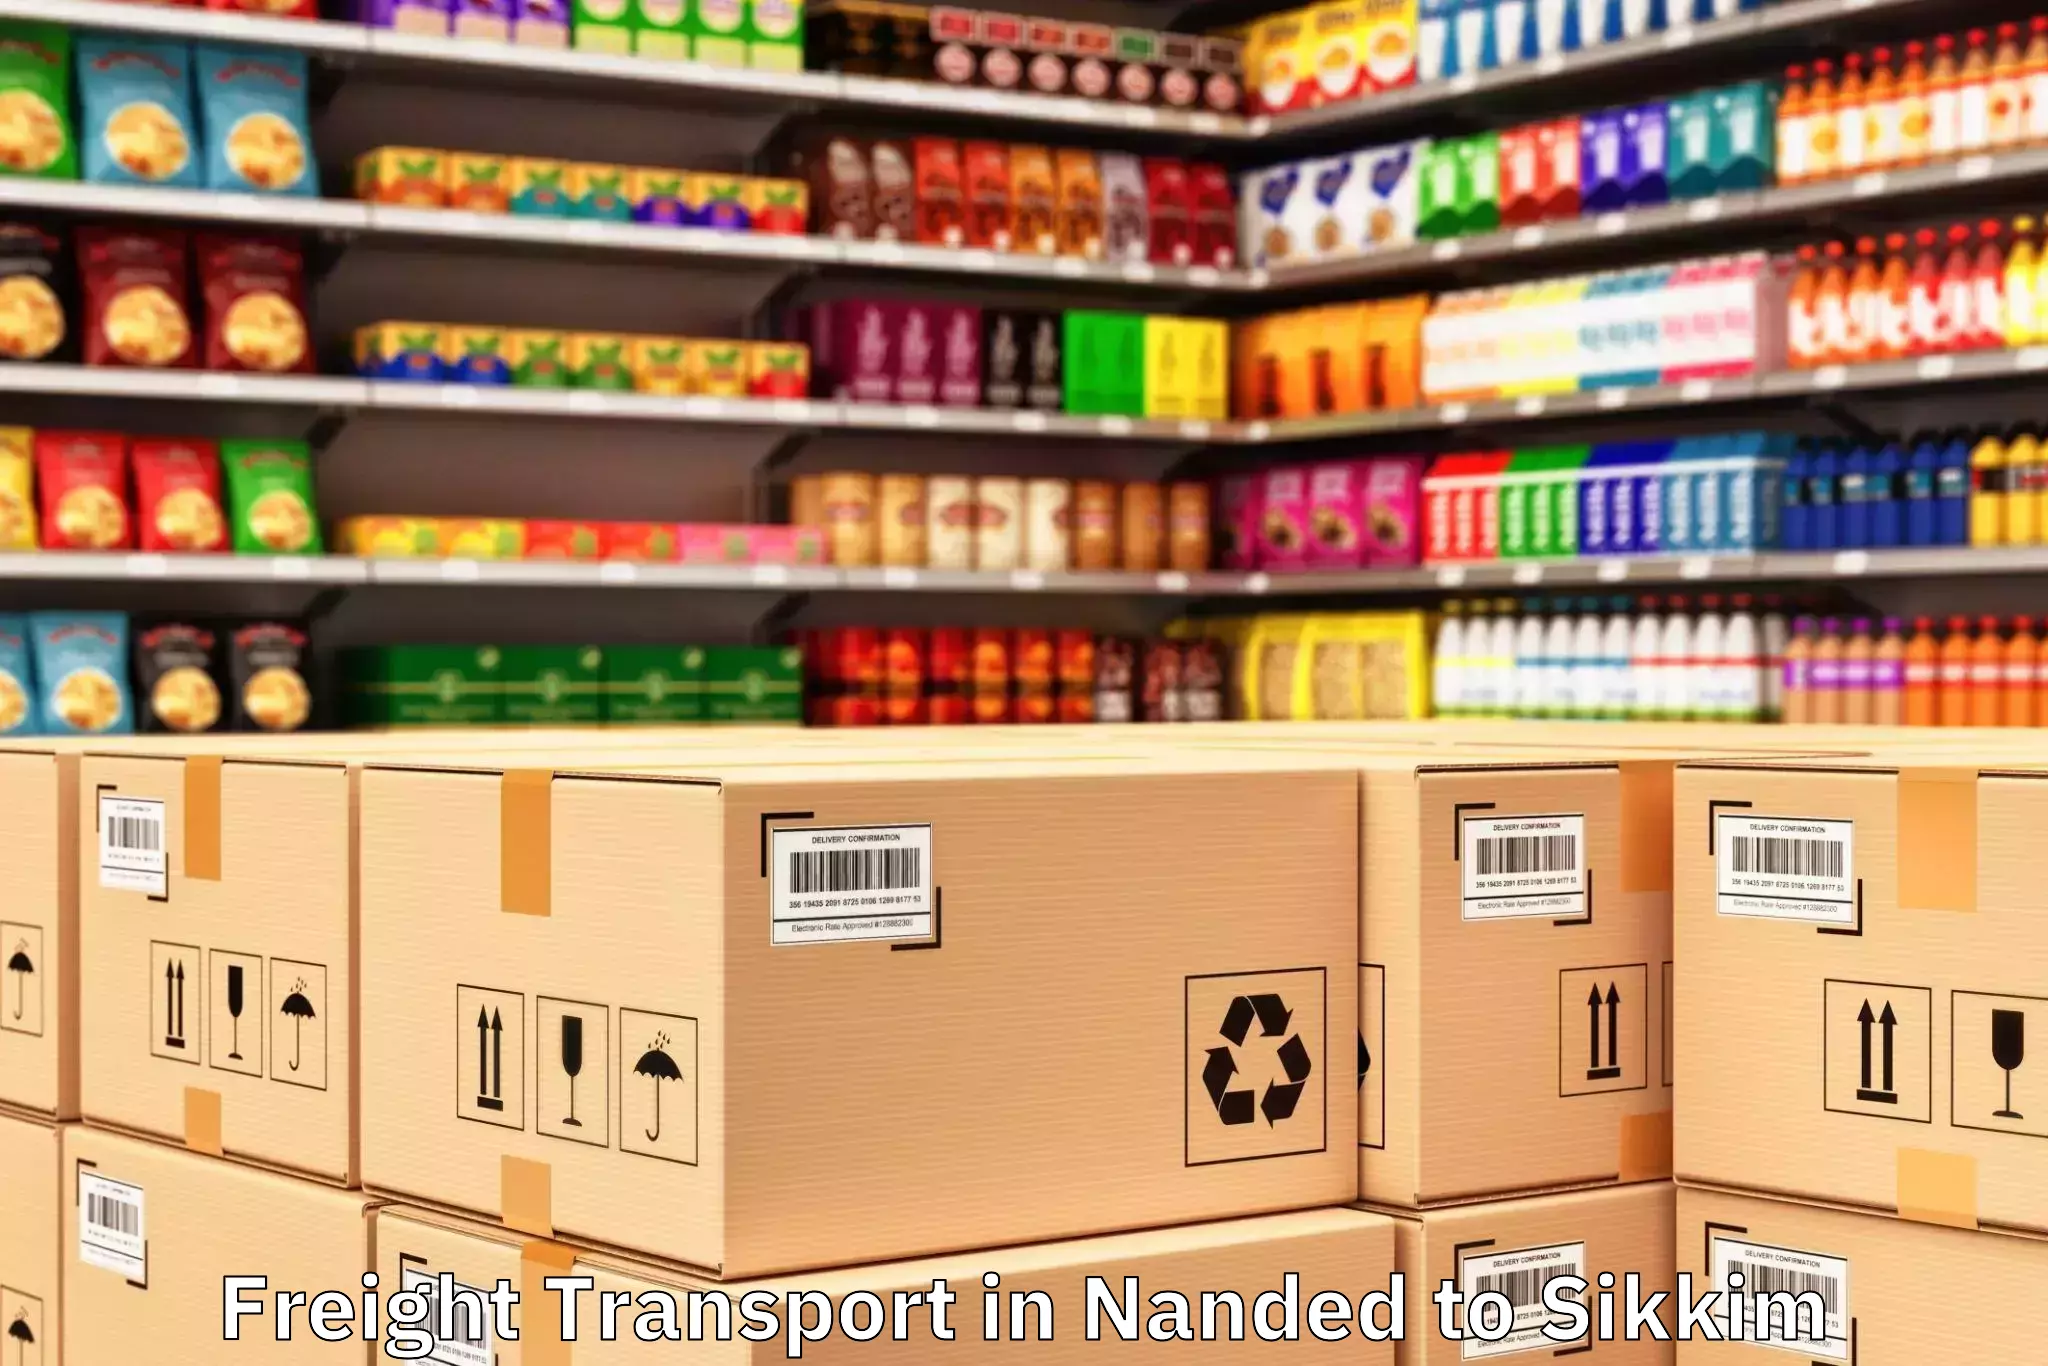 Efficient Nanded to Sikkim Freight Transport